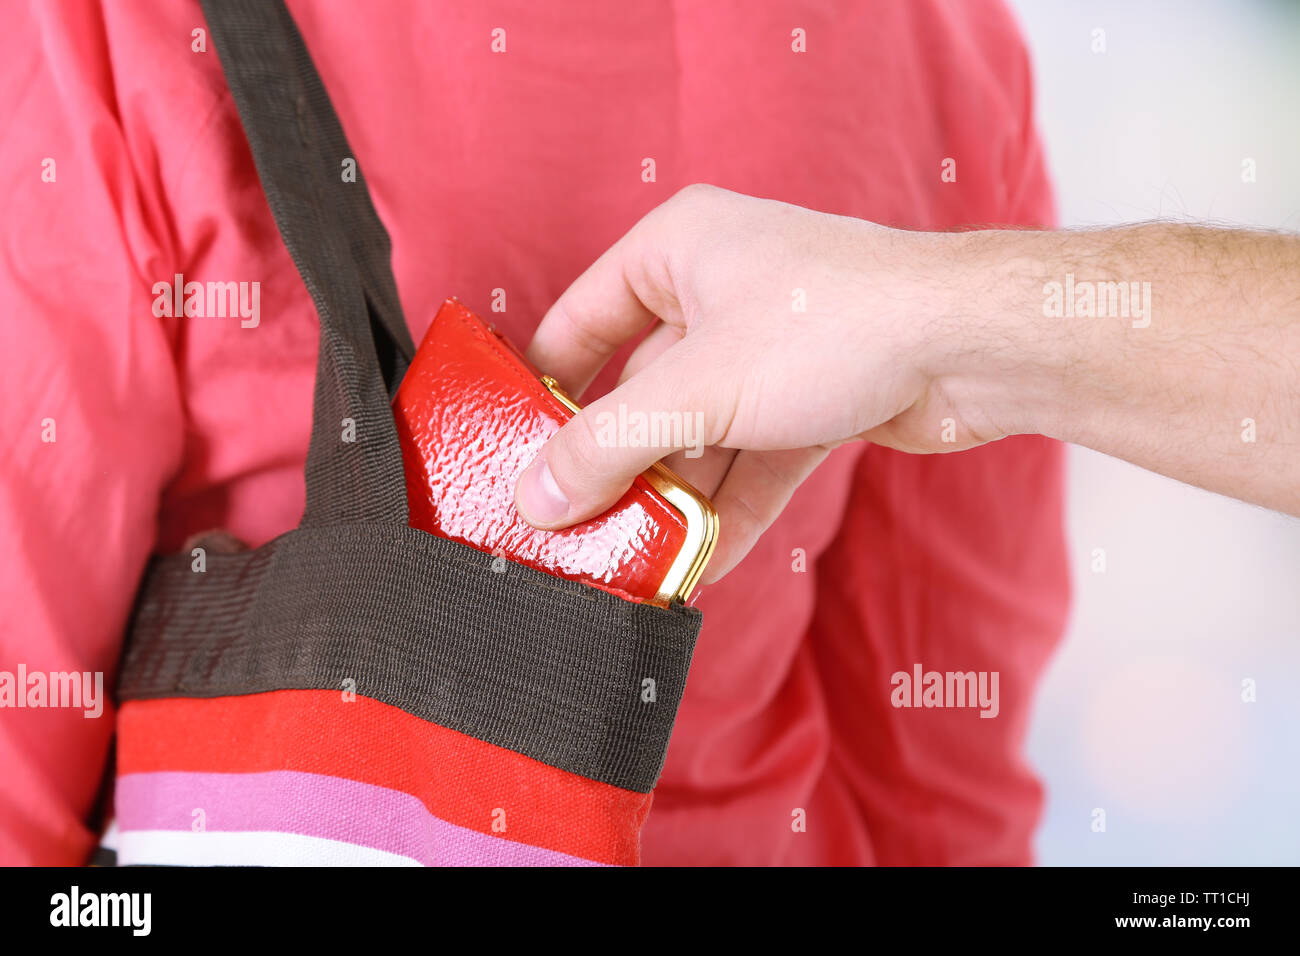 Pickpocket are stealing wallet from bag, close up, on light background Stock Photo